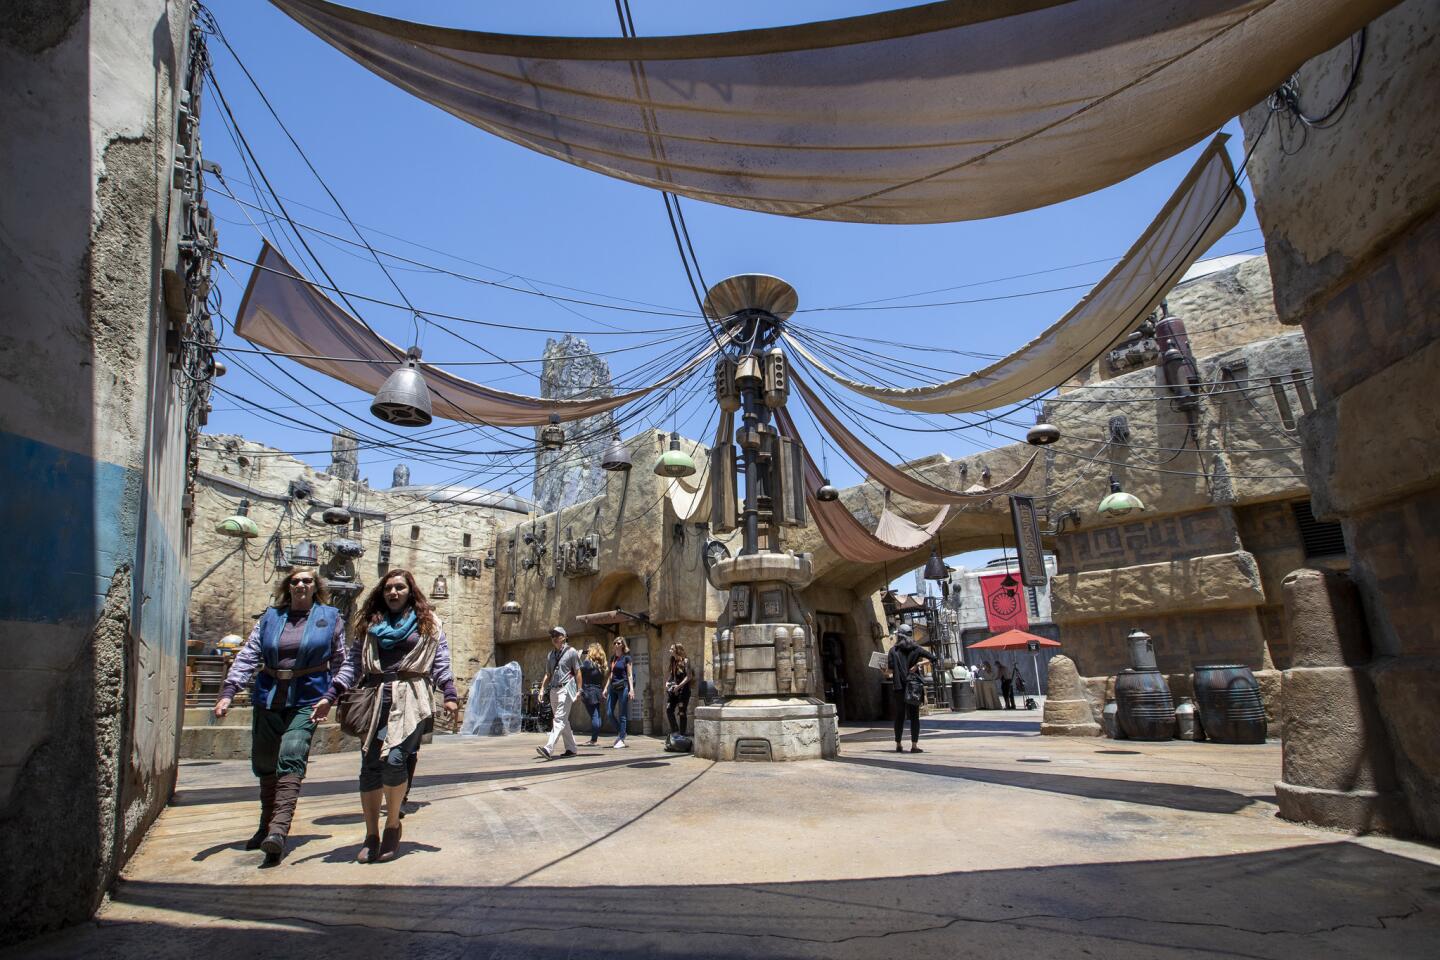 ANAHEIM, CALIF. -- WEDNESDAY, MAY 29, 2019: Cast members walk through the Marketplace as media members get a preview during the Star Wars: Galaxy's Edge Media Preview event at the Disneyland Resort in Anaheim, Calif., on May 29, 2019. (PHOTOS ARE EMBARGOED UNTIL 6PM MAY 29) (Allen J. Schaben / Los Angeles Times)